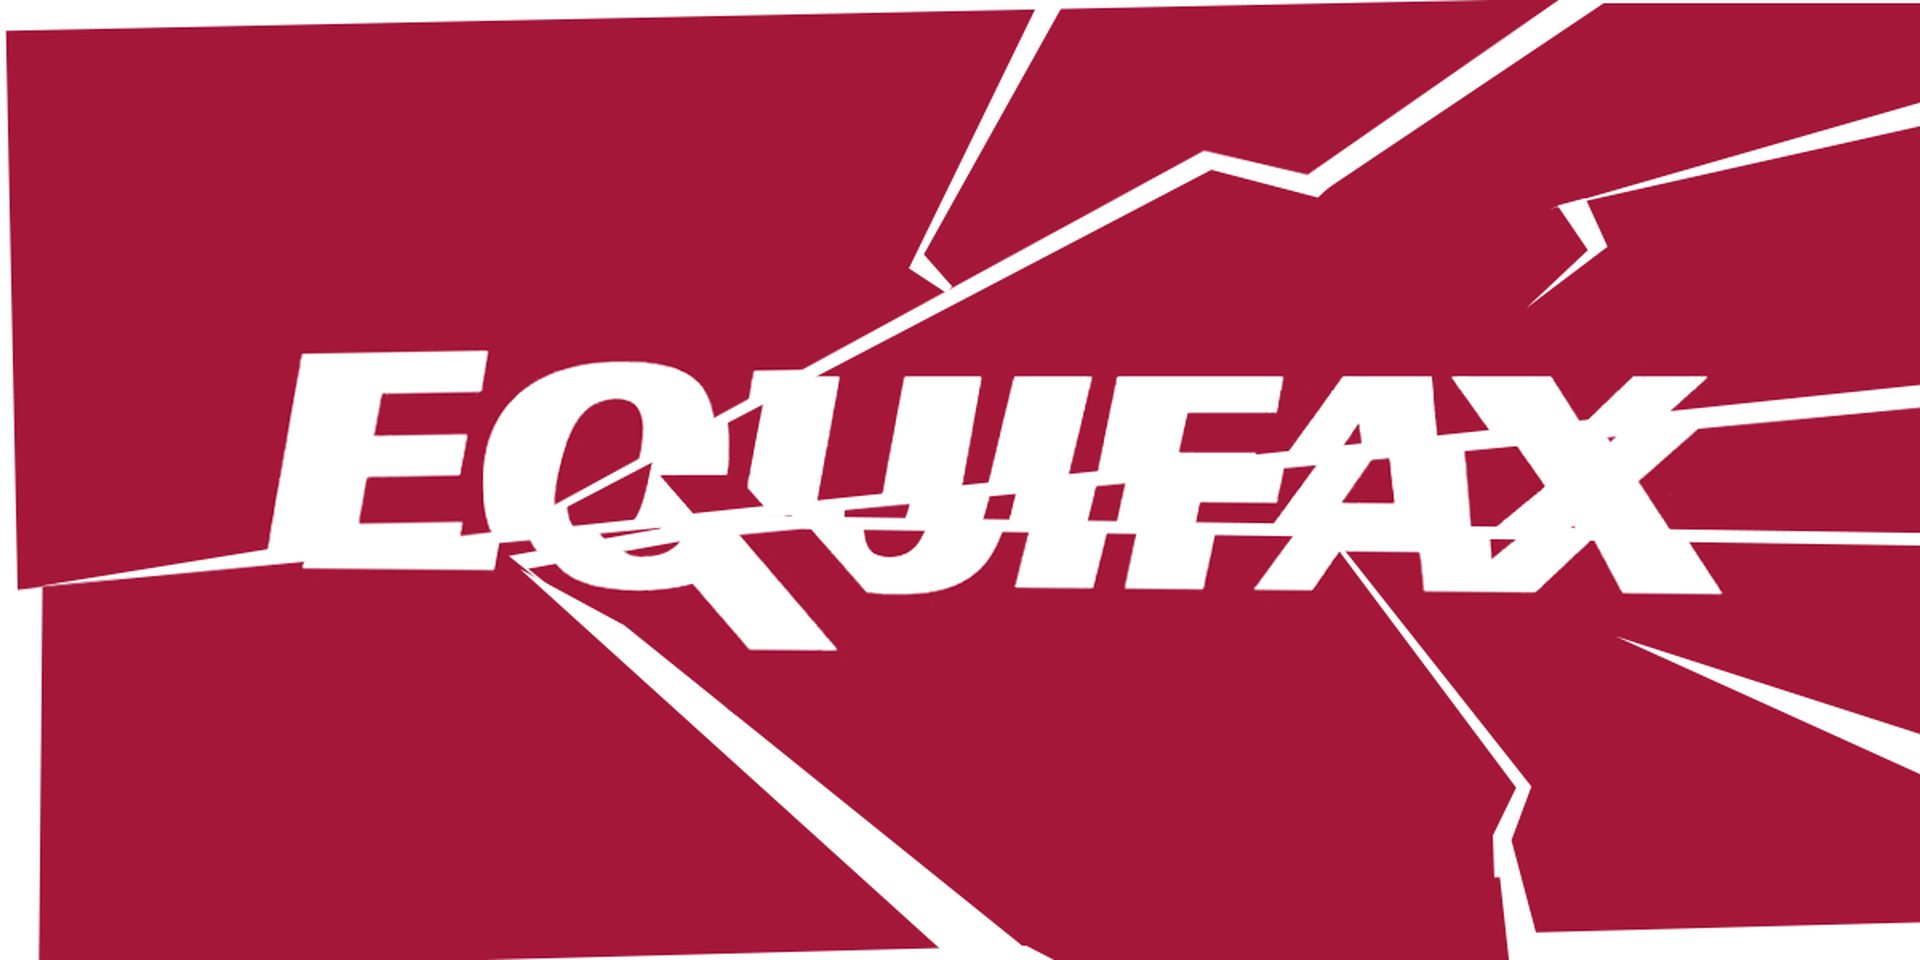 When will Equifax Settlement checks be mailed?